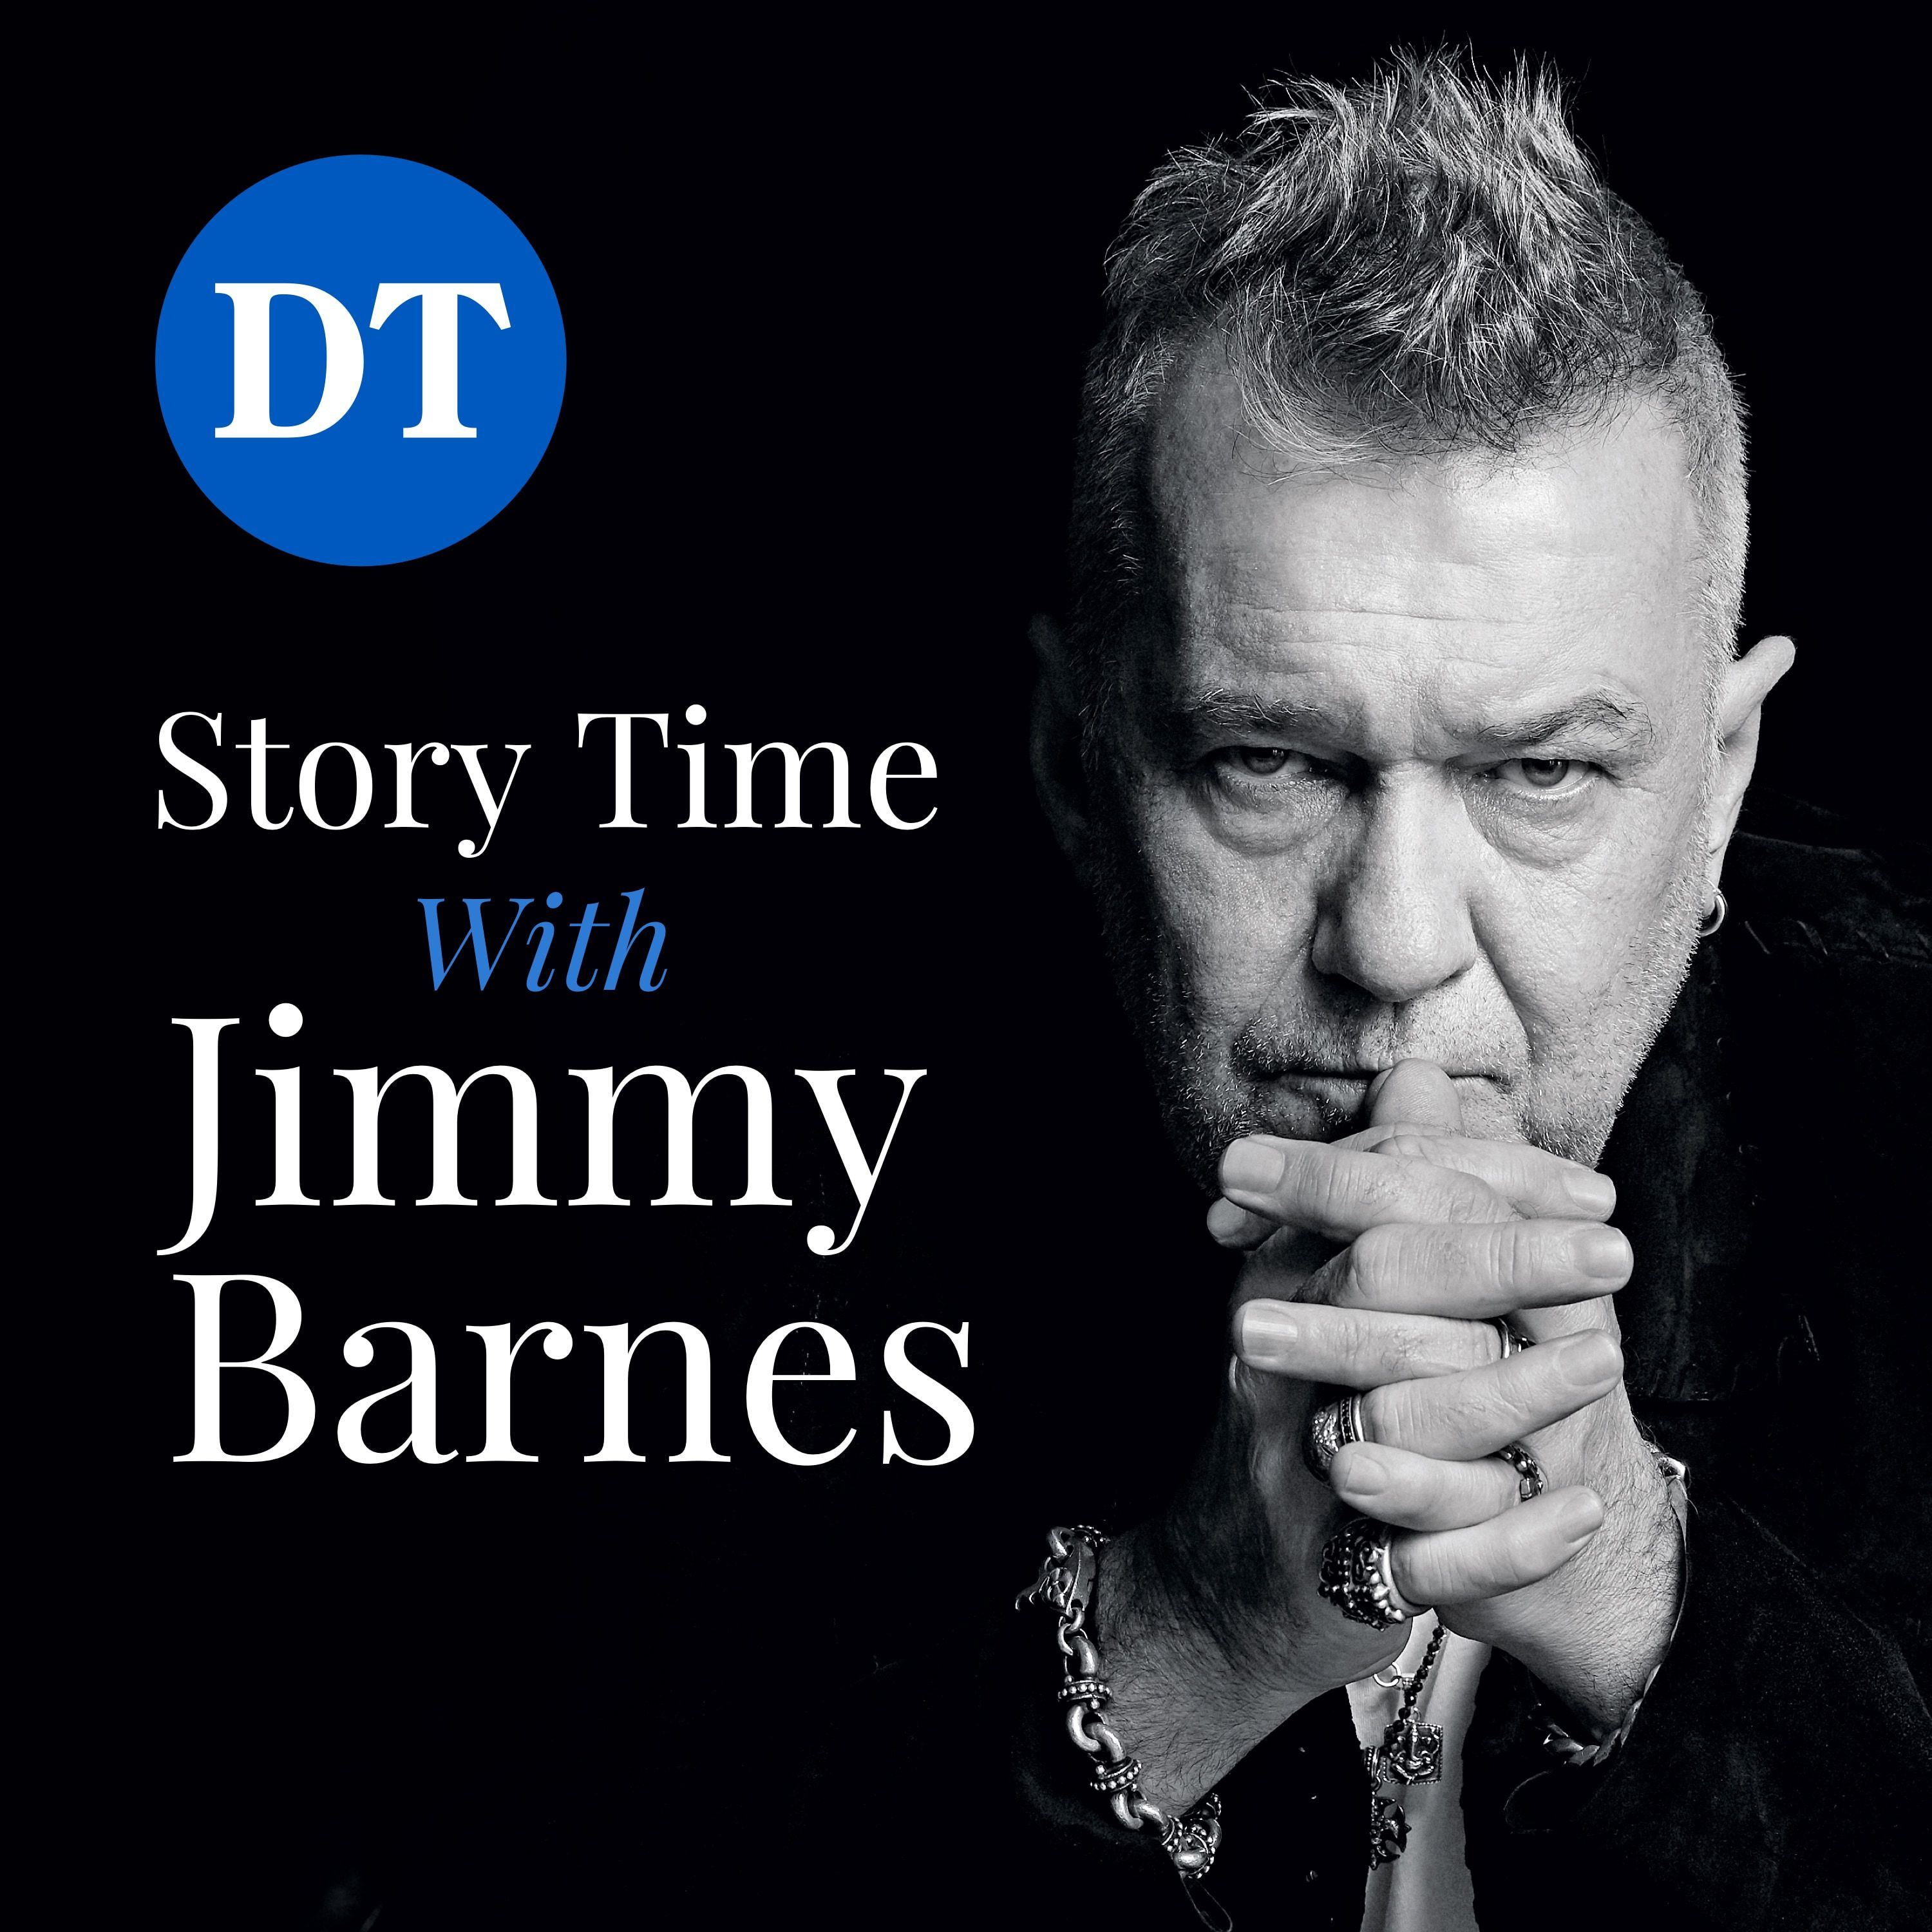 Introducing - Story Time with Jimmy Barnes